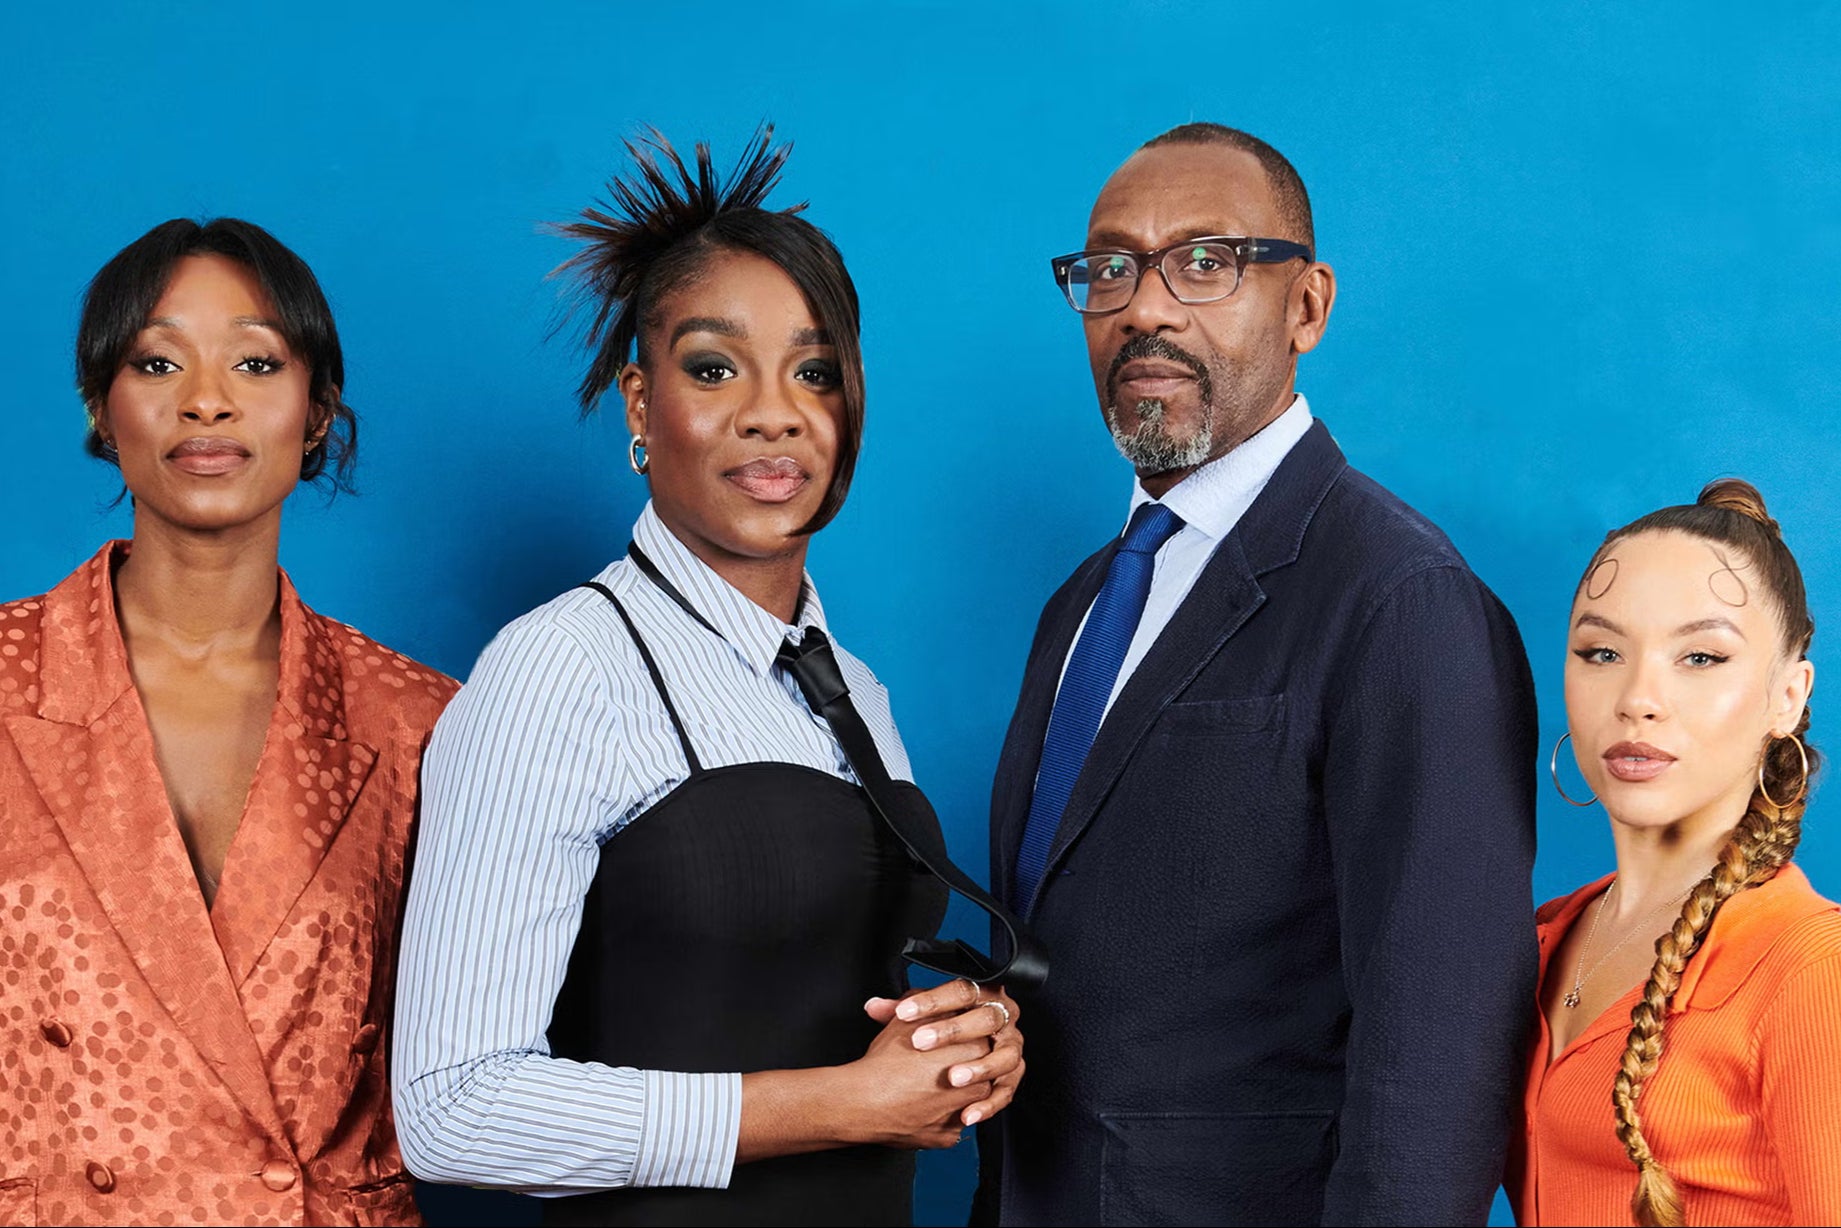 Lenny Henry with his leading actors Rochelle Neil, Yazmin Belo and Saffron Coomber – ‘The sisterhood who protects each other when no one else will’